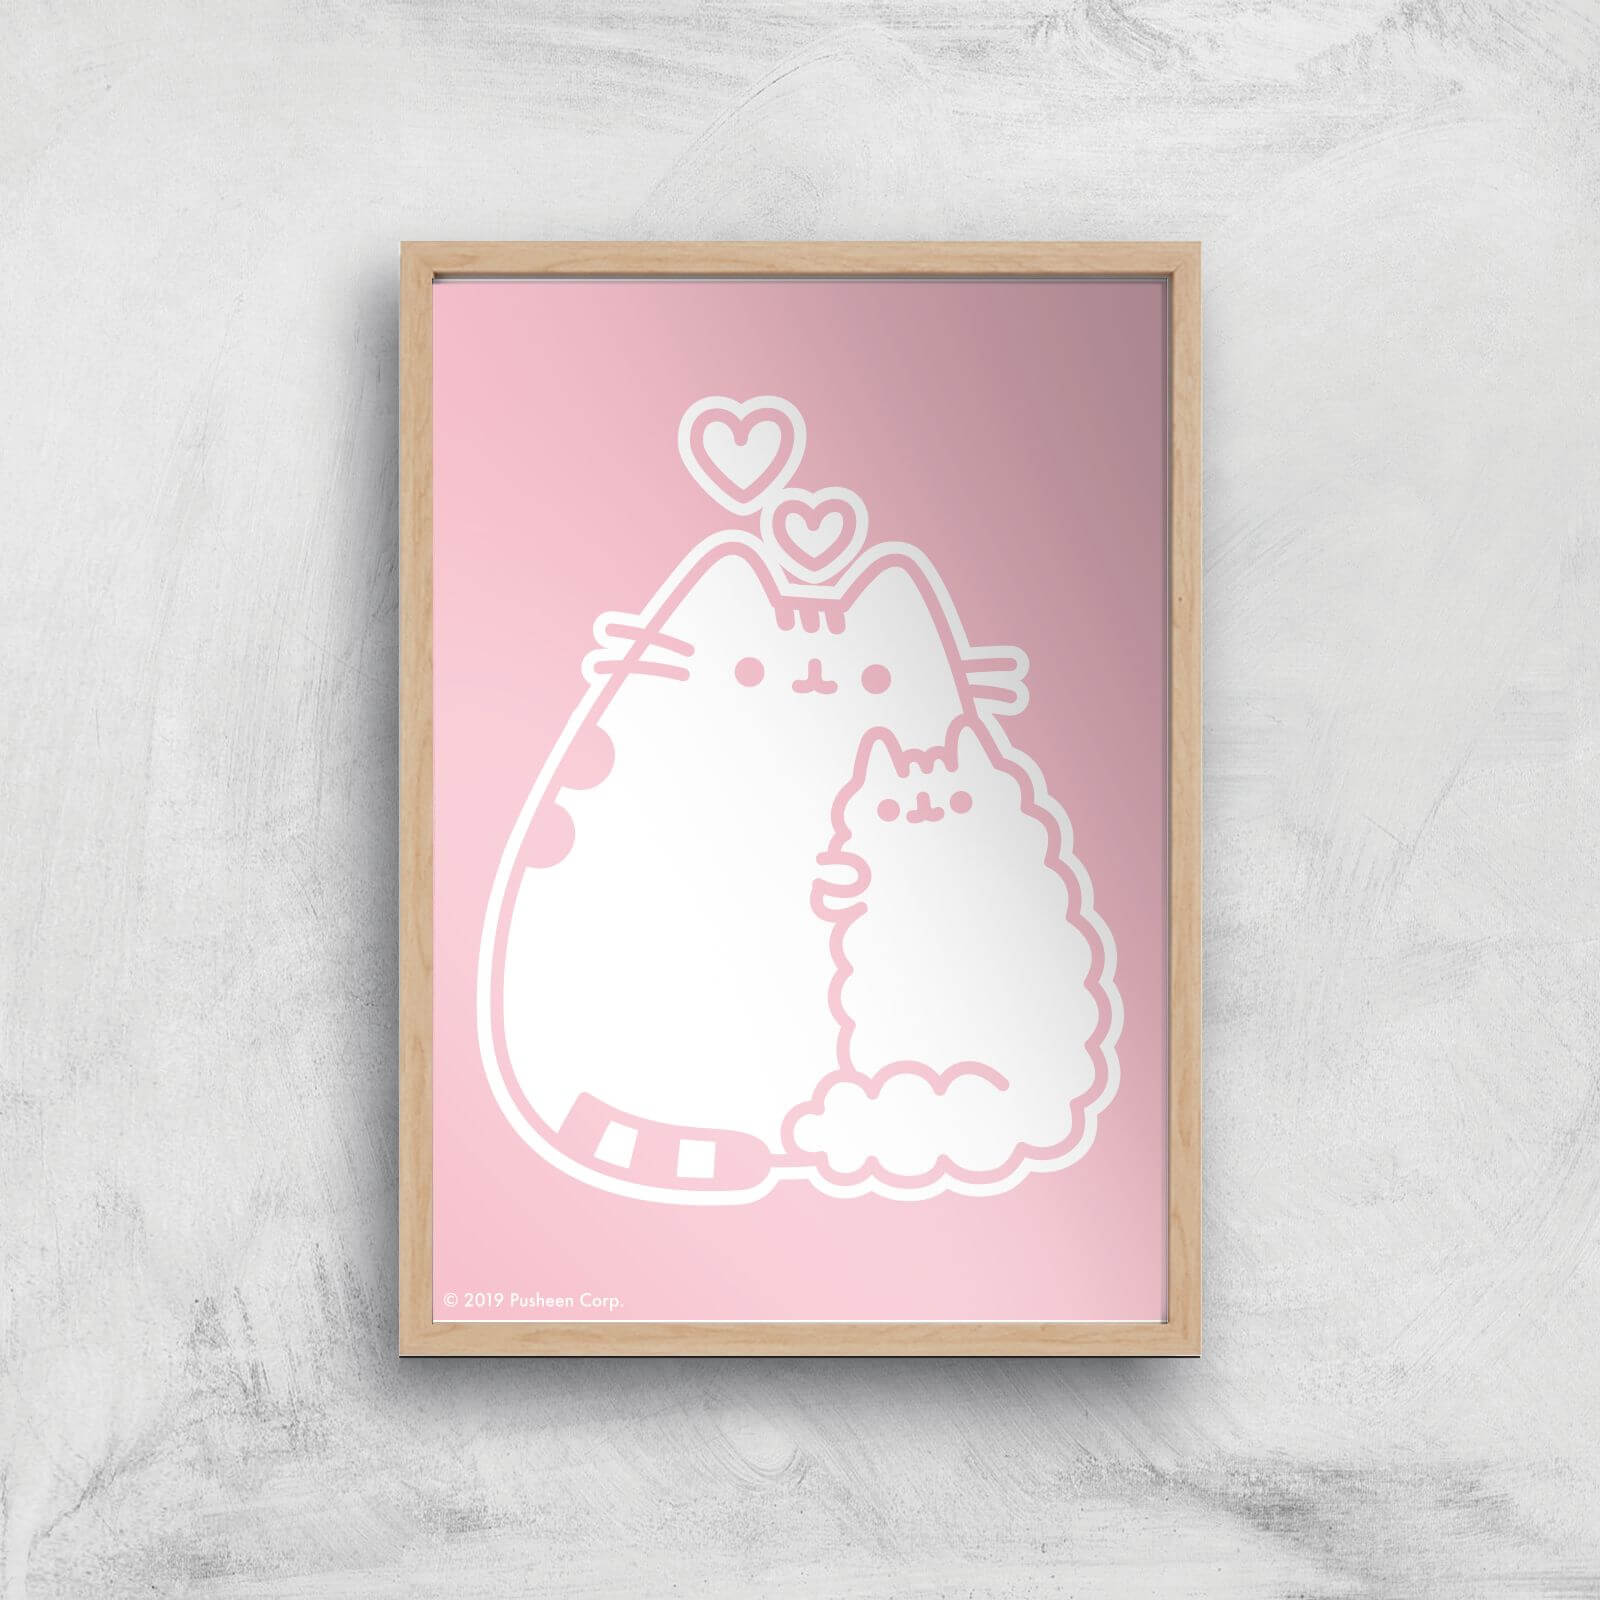 Pusheen Stormy I Love You Giclee Art Print - A2 - Wooden Frame